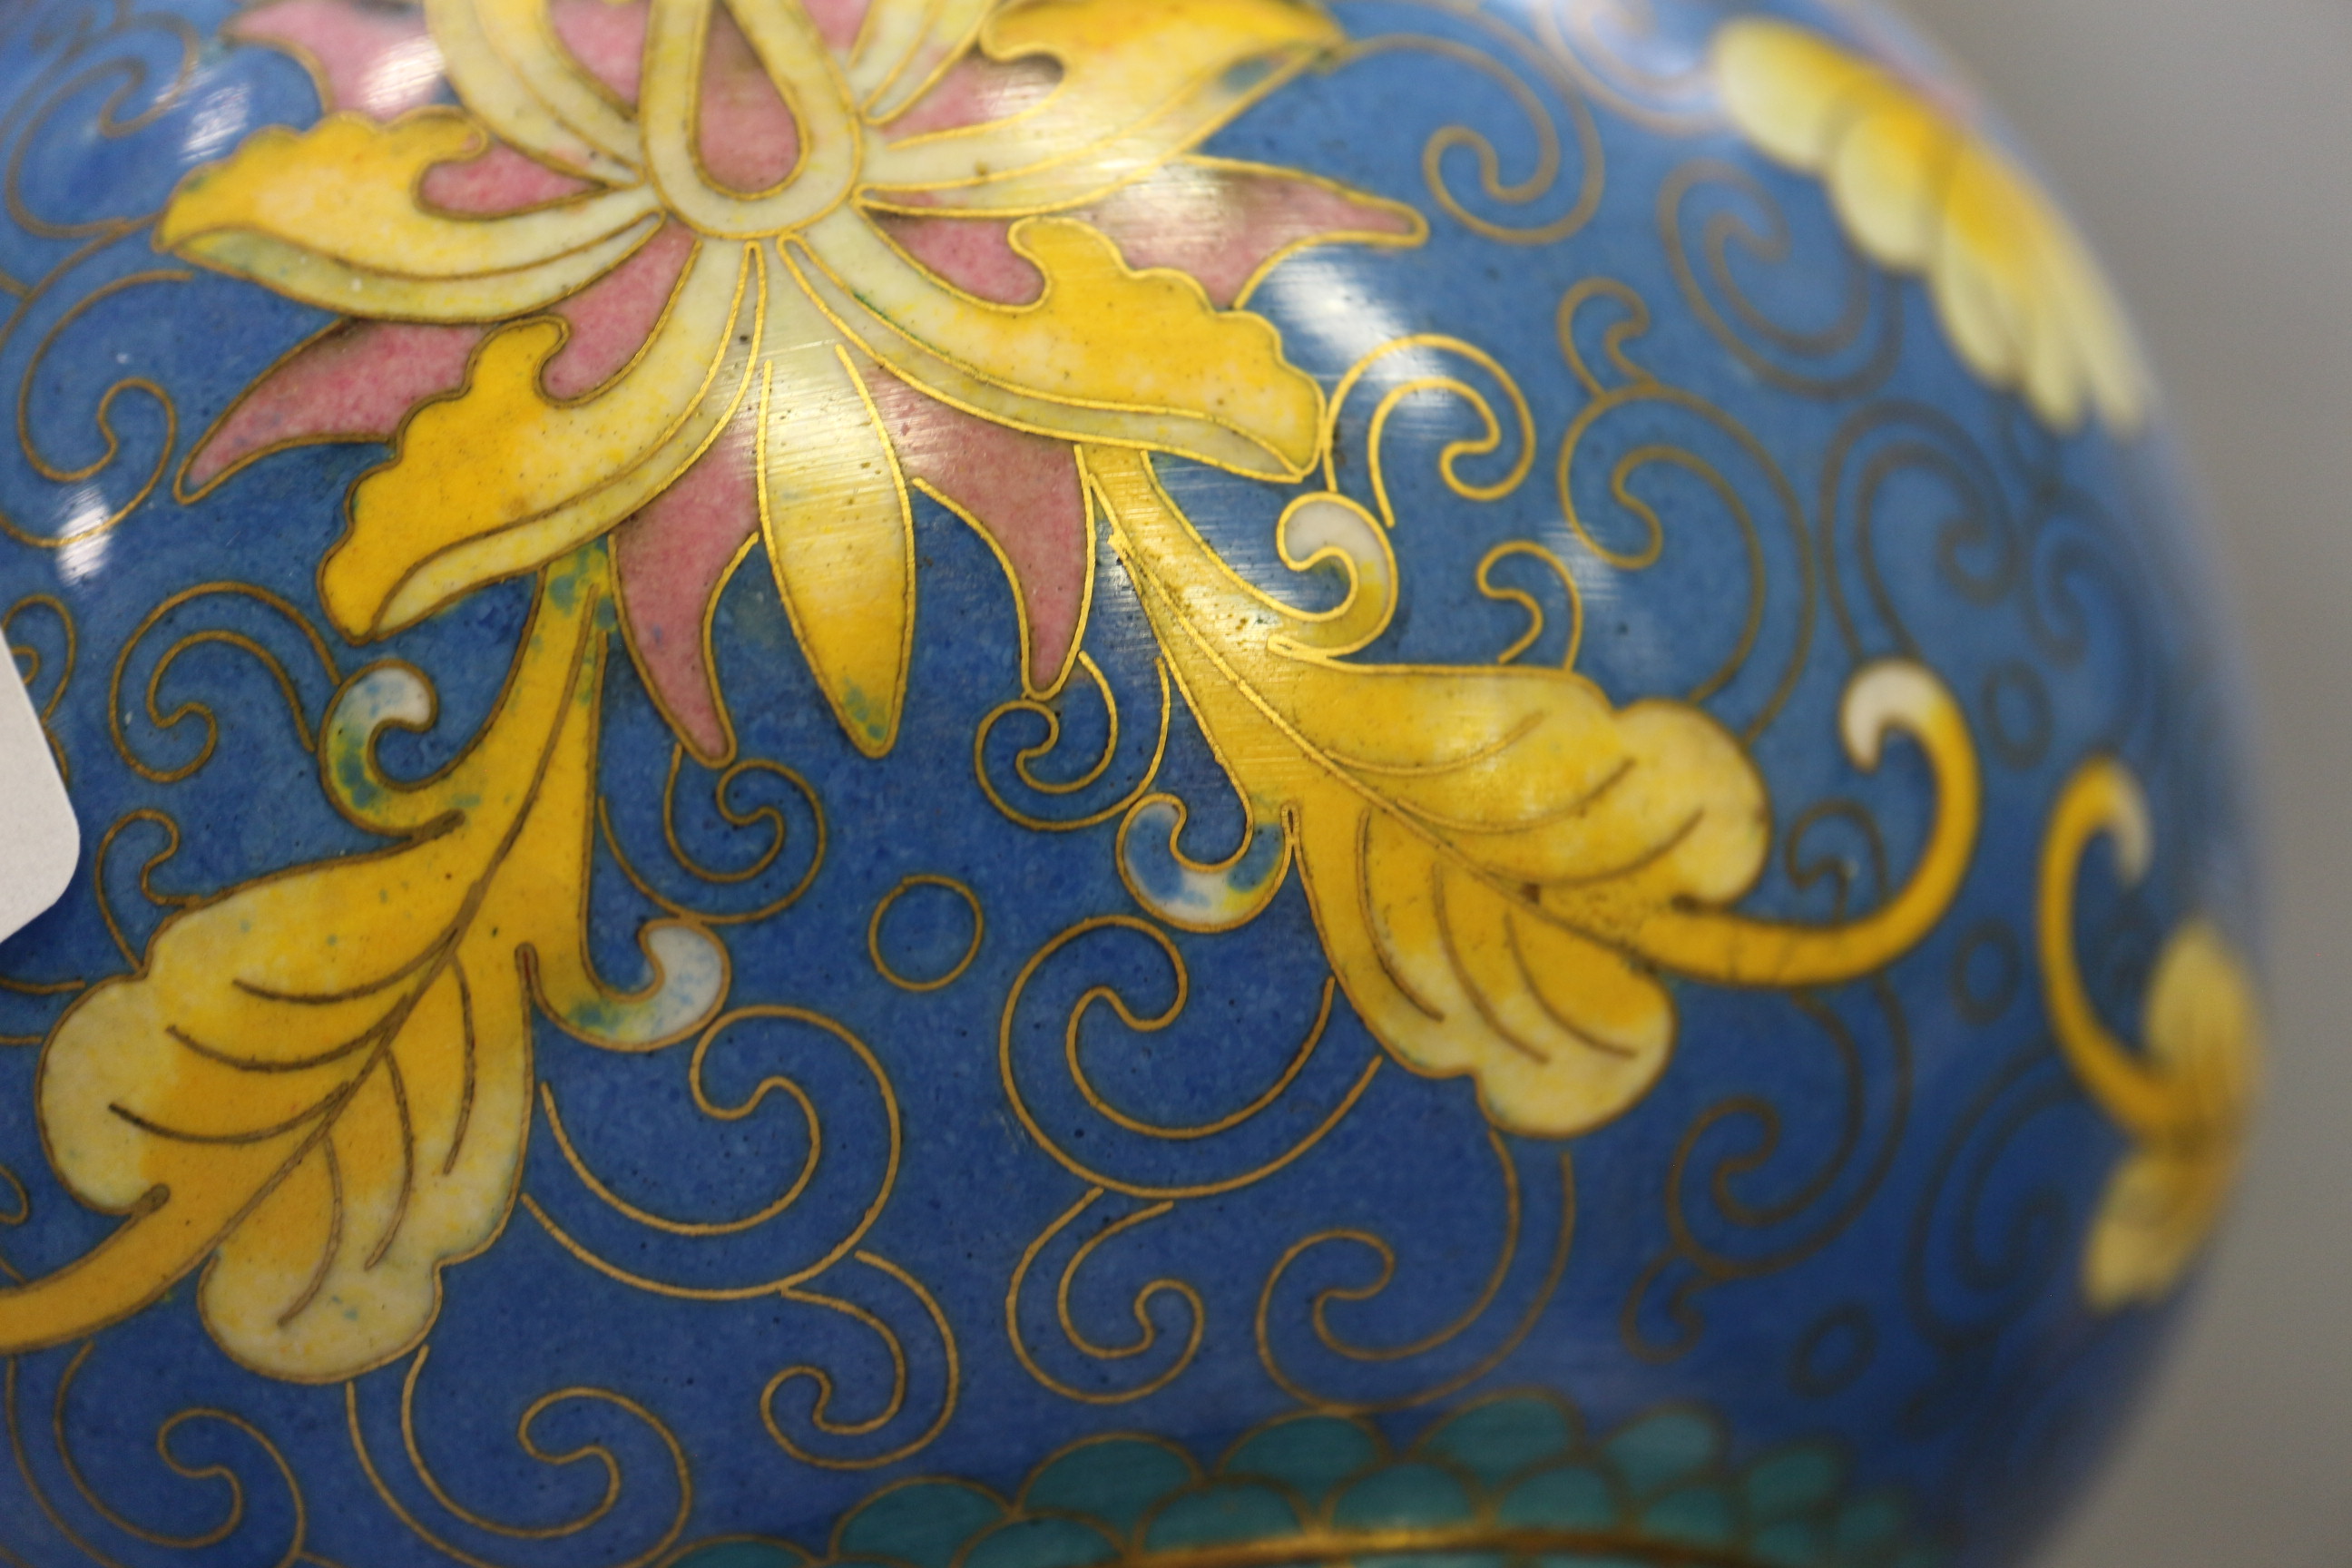 A Chinese cloisonne bulbous bottle neck vase with floral and scrolled designs on a blue ground, 8" - Image 17 of 18